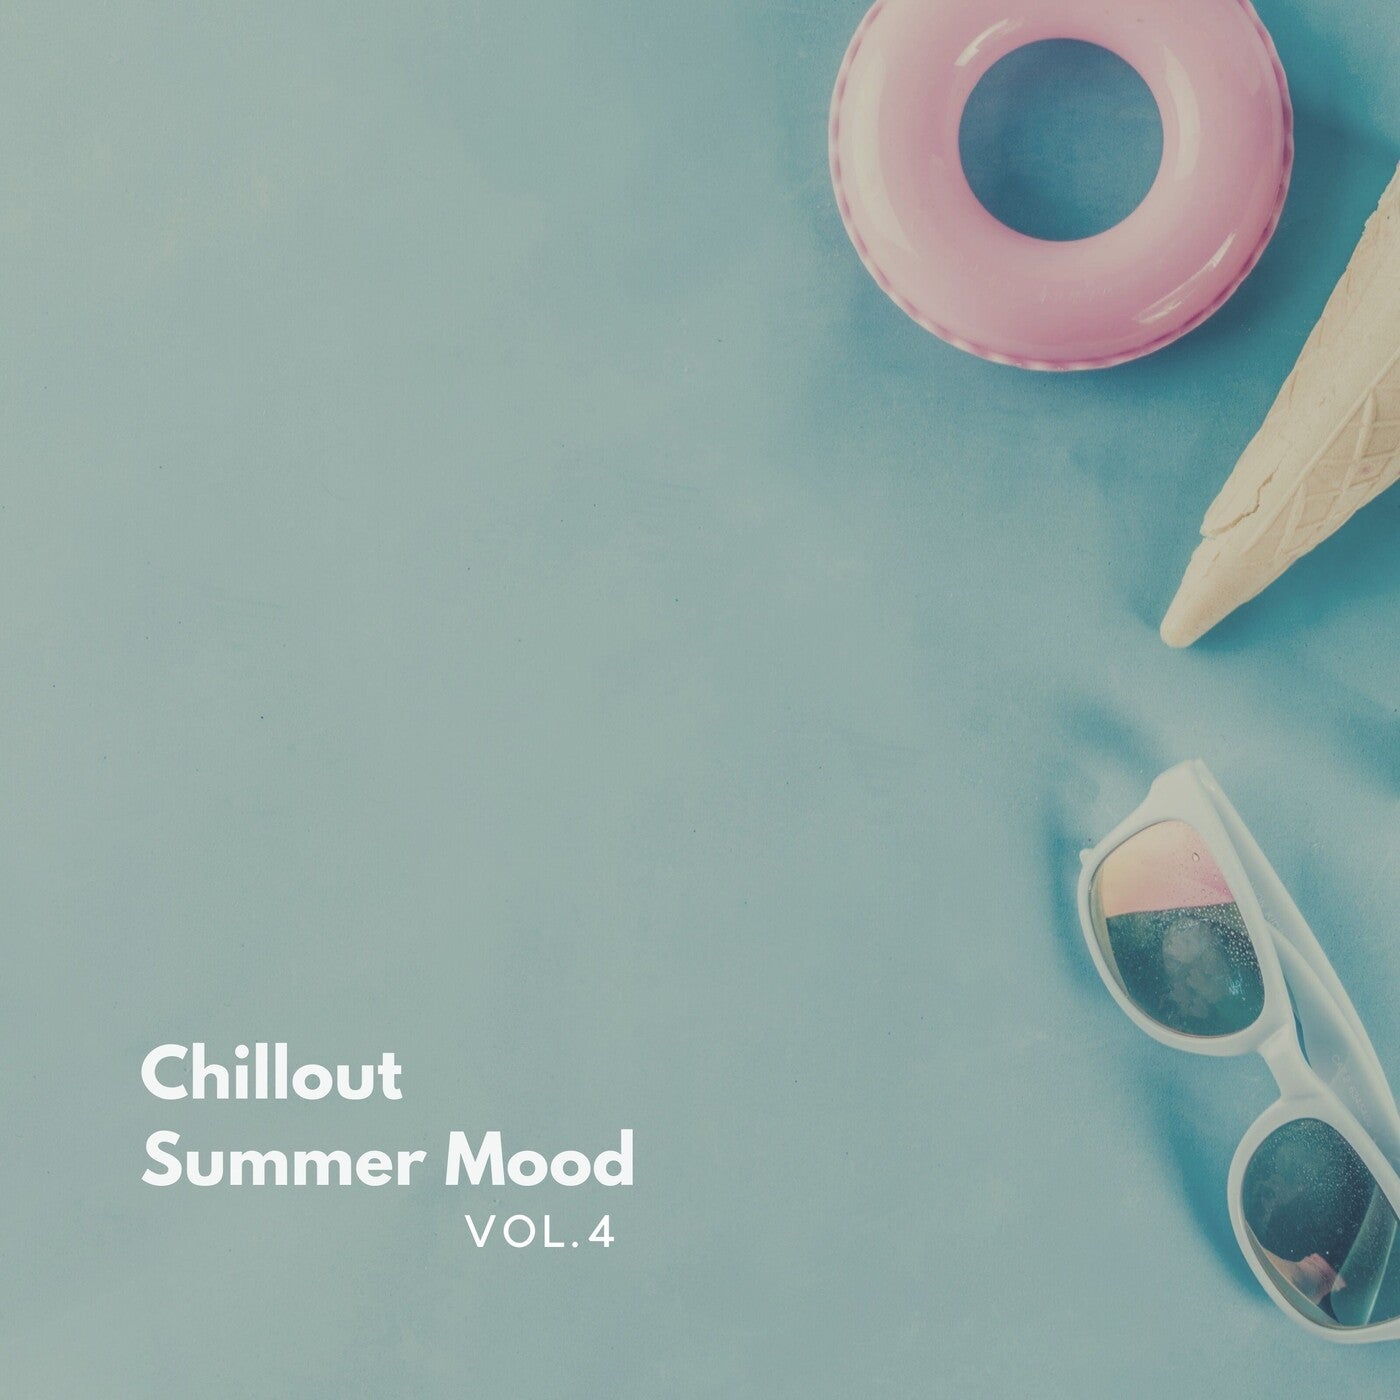 Chillout Summer Mood, Vol. 4